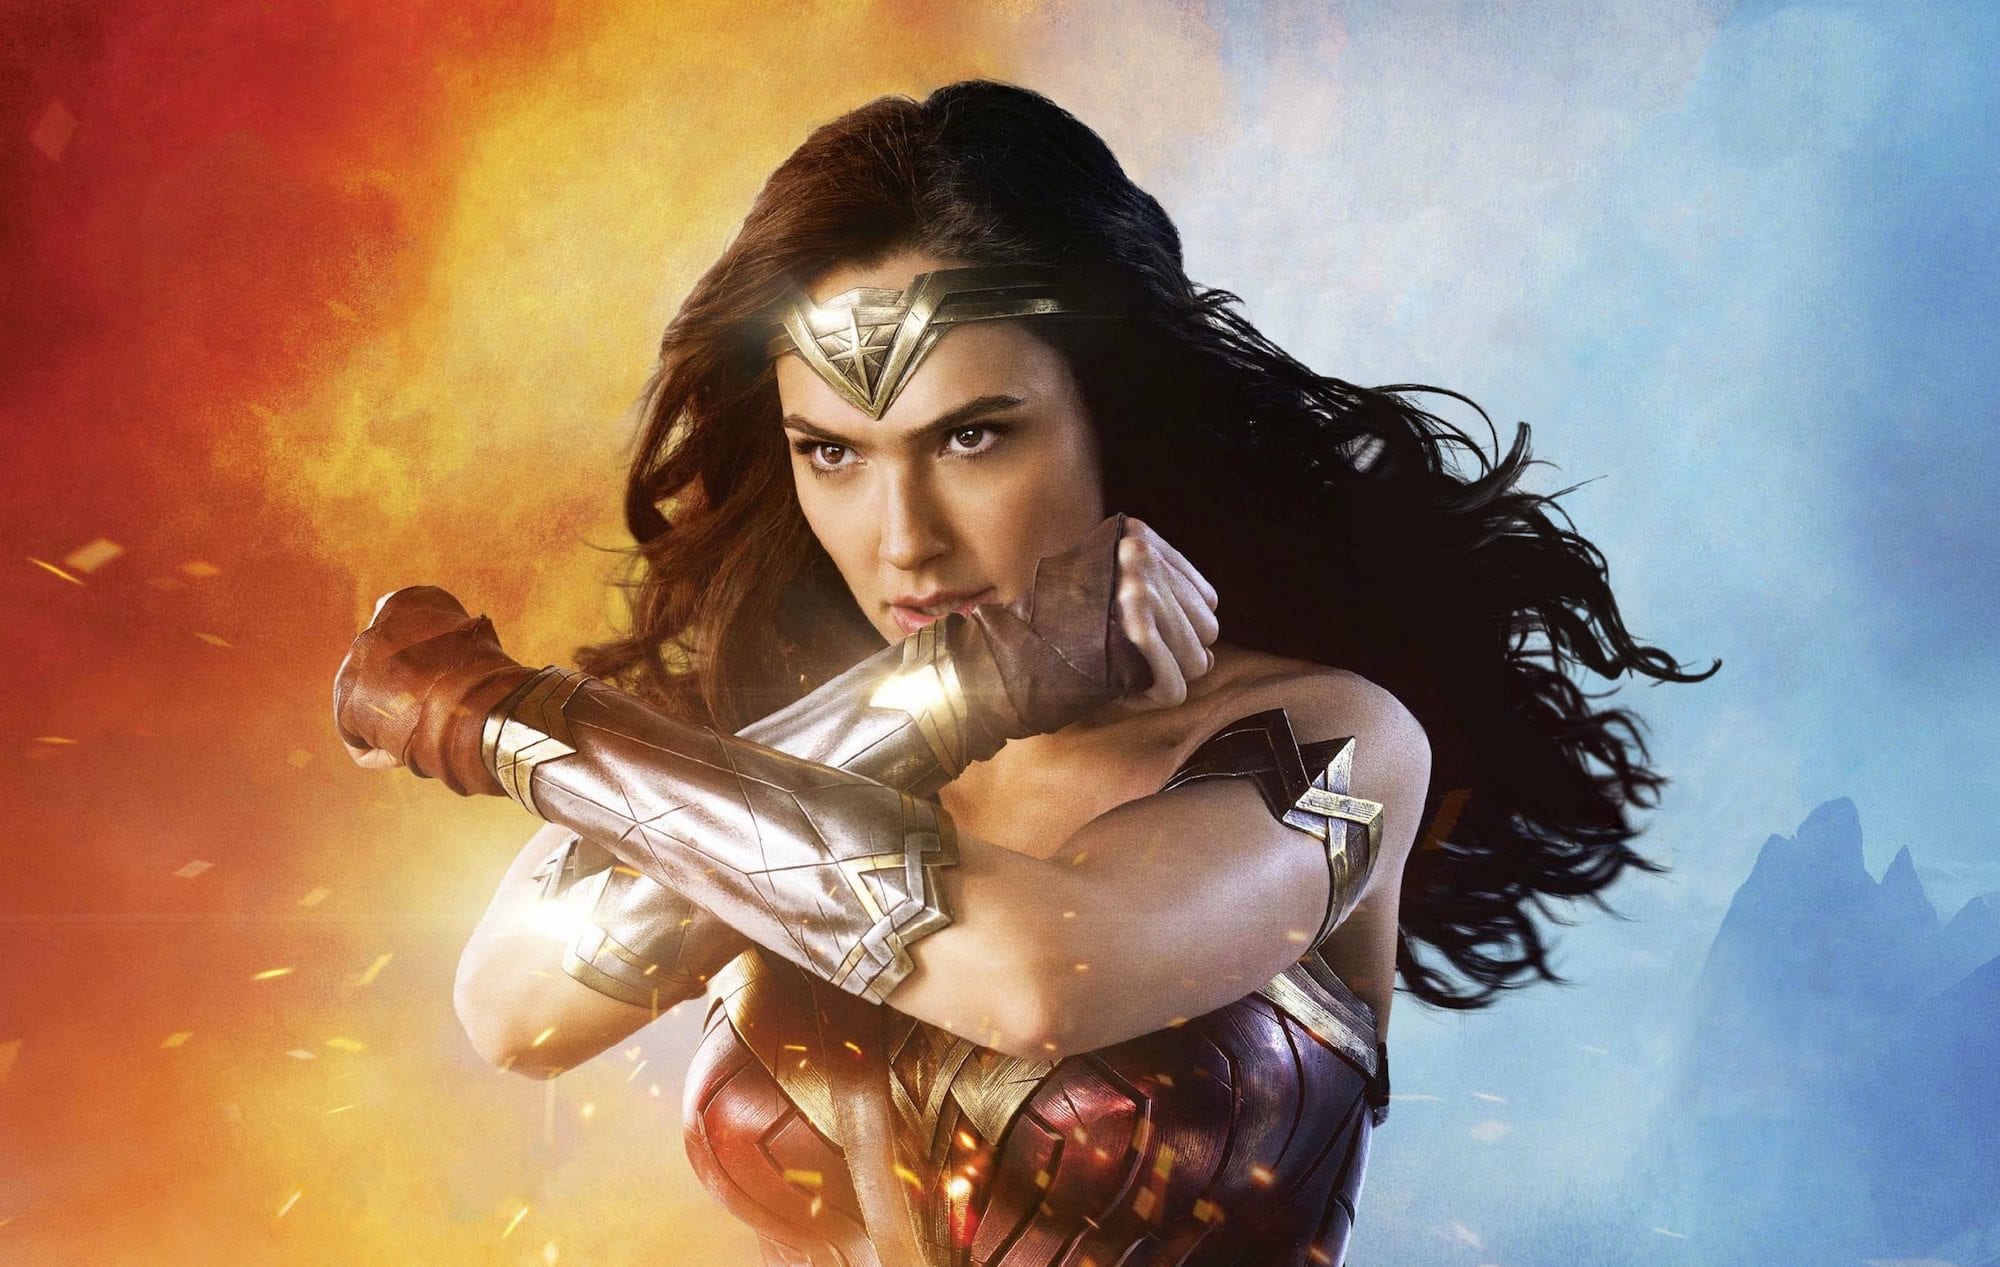 The Producers Guild Of America’s newly unveiled anti-sexual harassment guidelines will be adopted by Patty Jenkins’ 'Wonder Woman 2', making it the first movie to do so. The PGA board of directors voted unanimously in favor of the guidelines, issued to the organization’s 8,200 members.